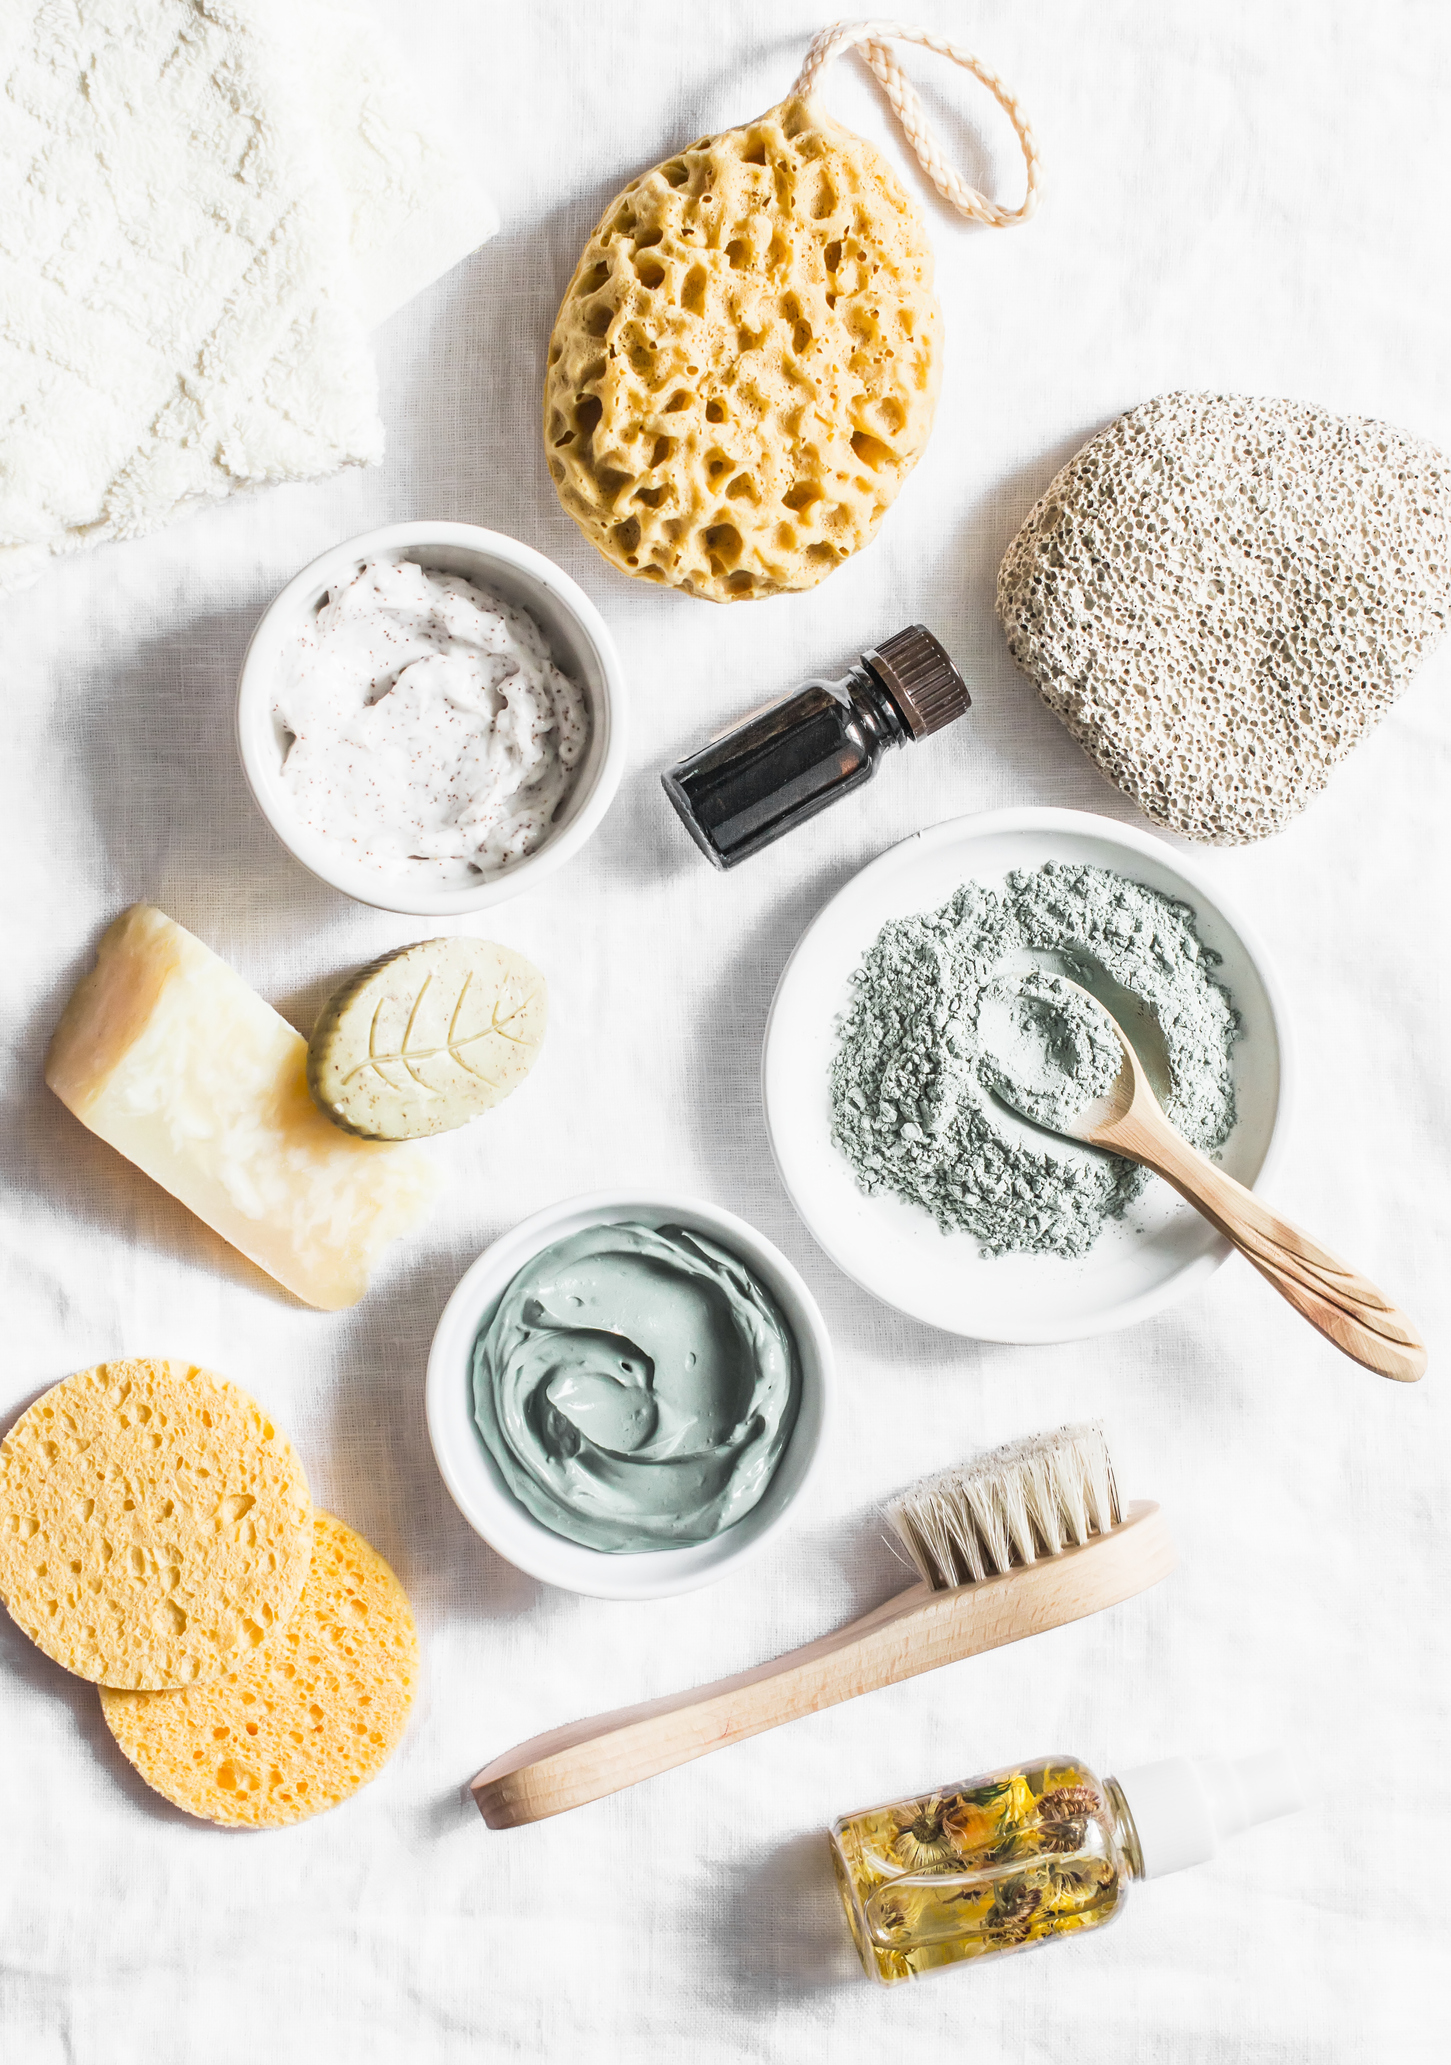 OUR FAVE CLEAN BEAUTY INGREDIENTS FOR HEALTHY SKIN